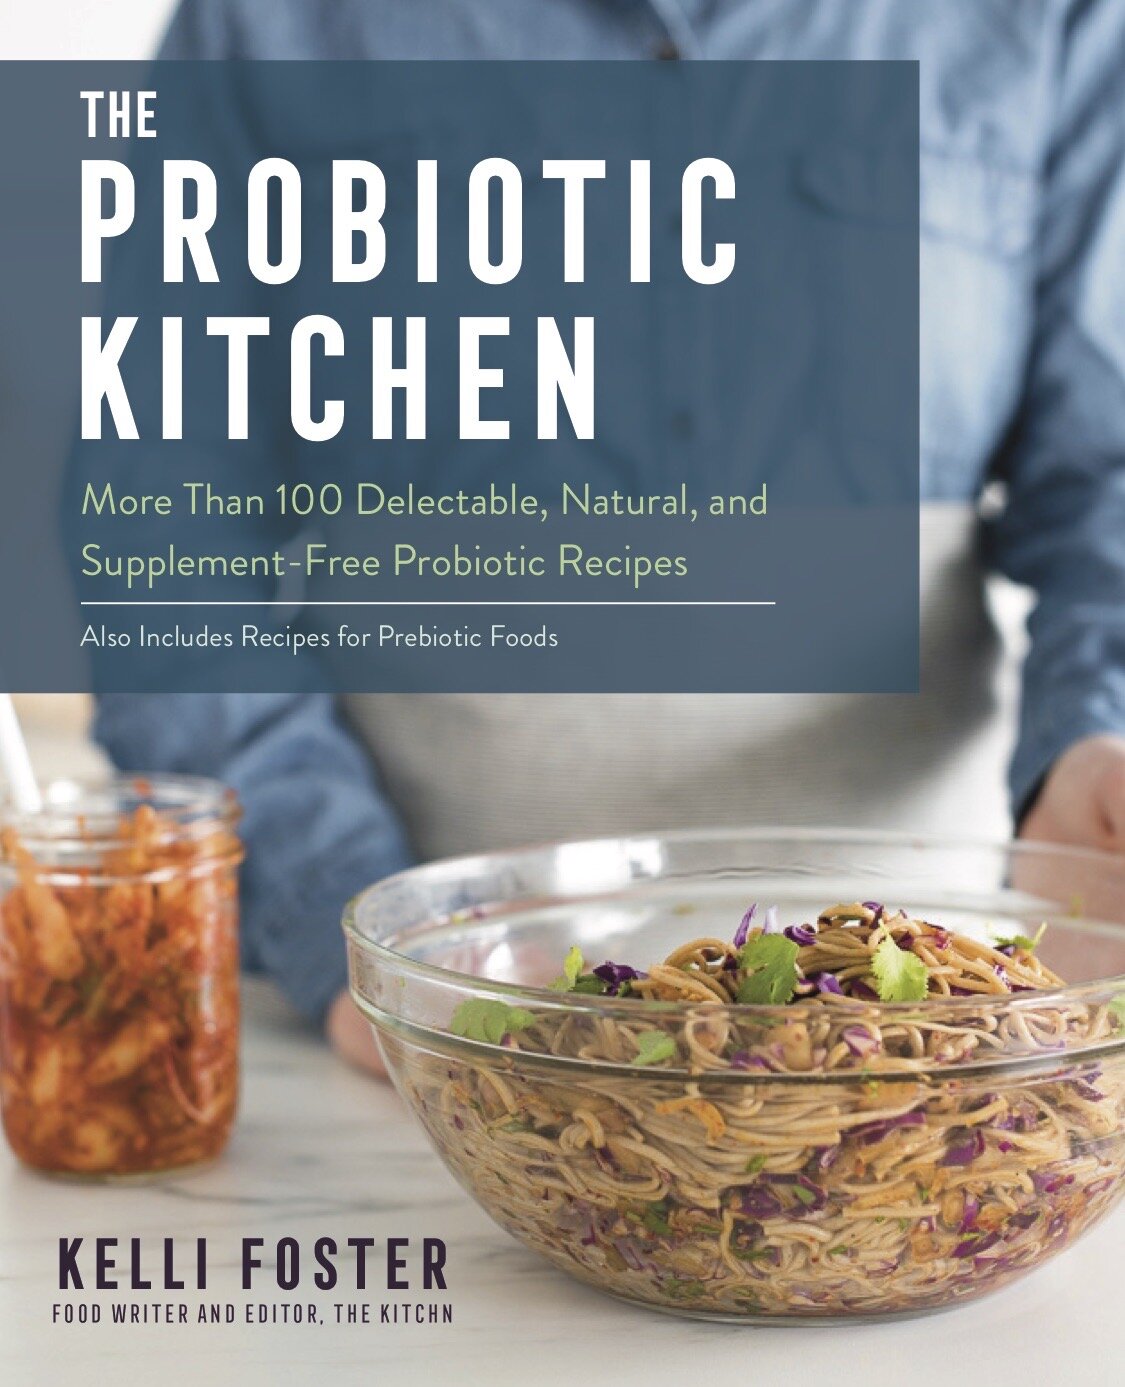 The Probiotic Kitchen: More Than 100 Delectable, Natural, and Supplement-Free Probiotic Recipes by Kelli Foster | DIdn't I Just Feed You, a food podcast for parents (even the ones who hate to cook)